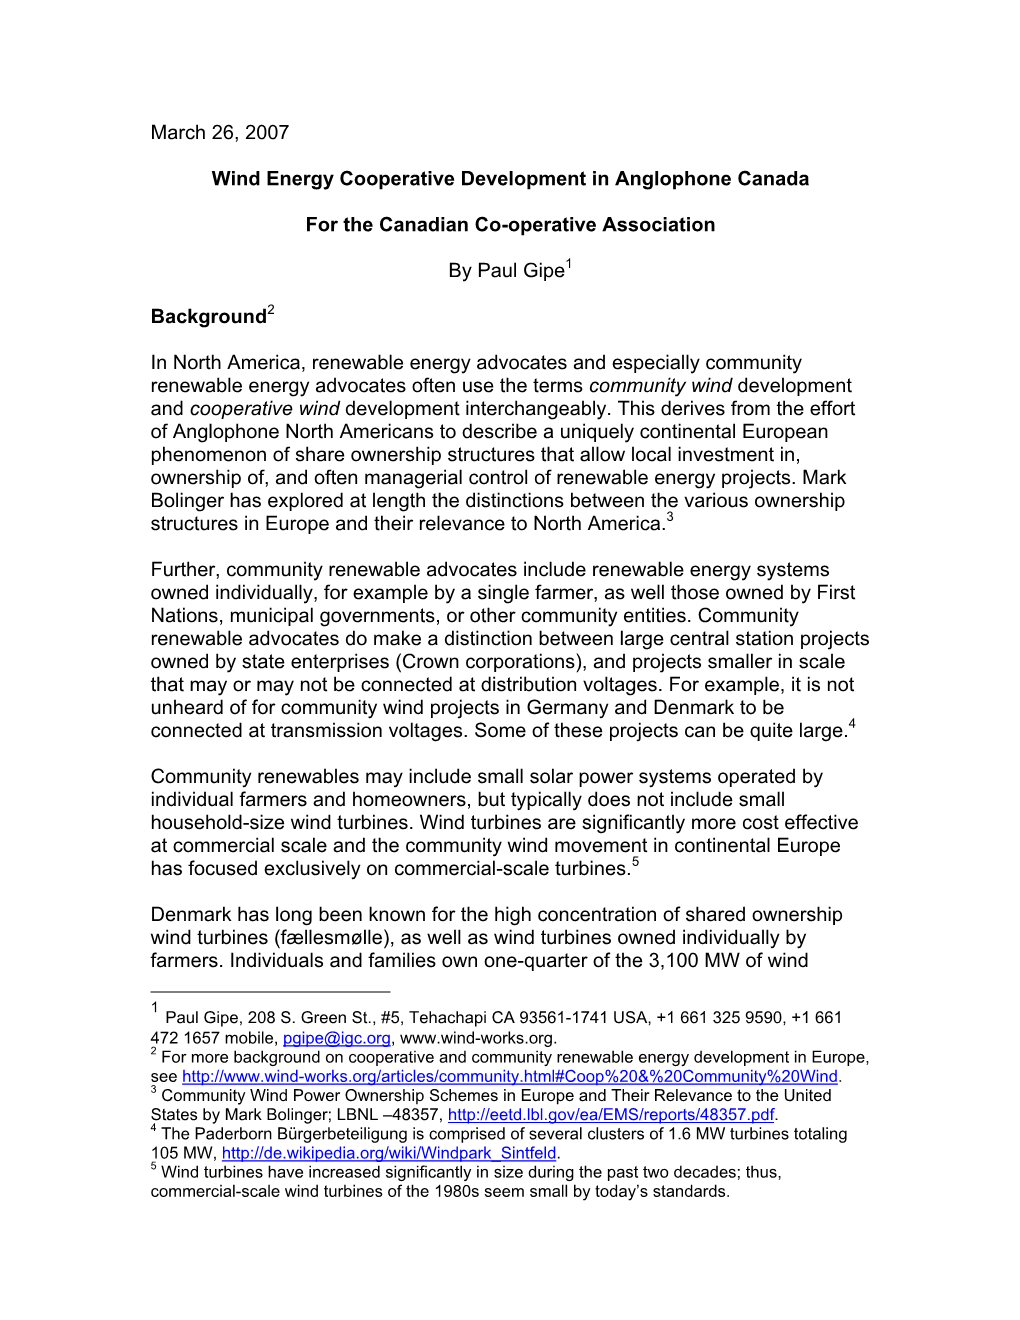 March 26, 2007 Wind Energy Cooperative Development In